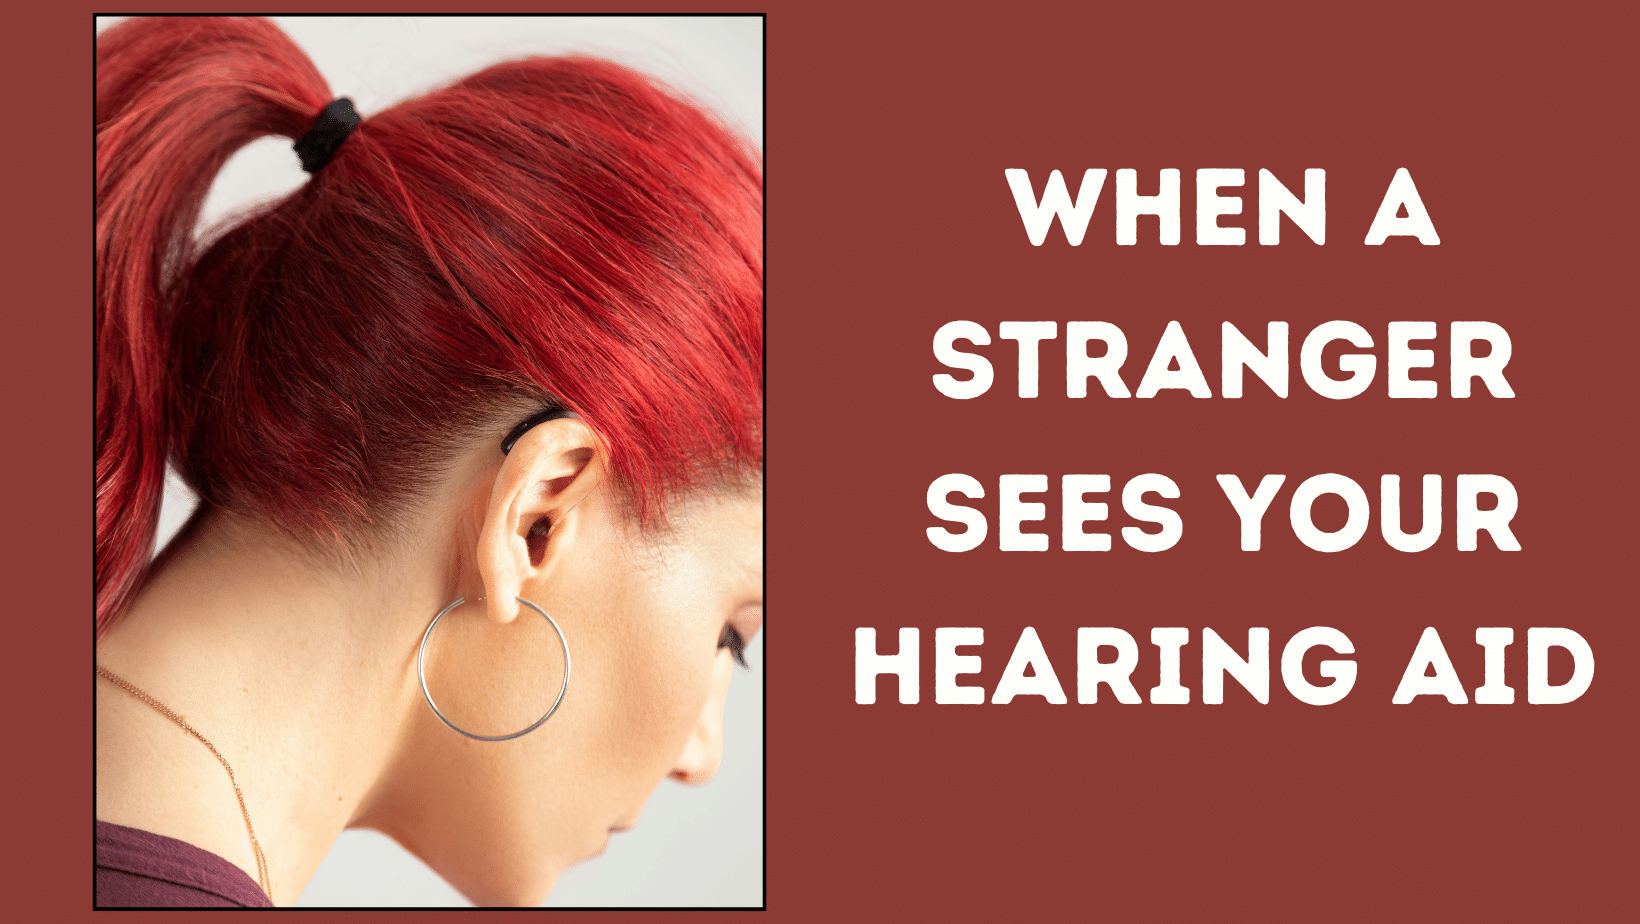 Featured image for “When a Stranger Sees Your Hearing Aid”